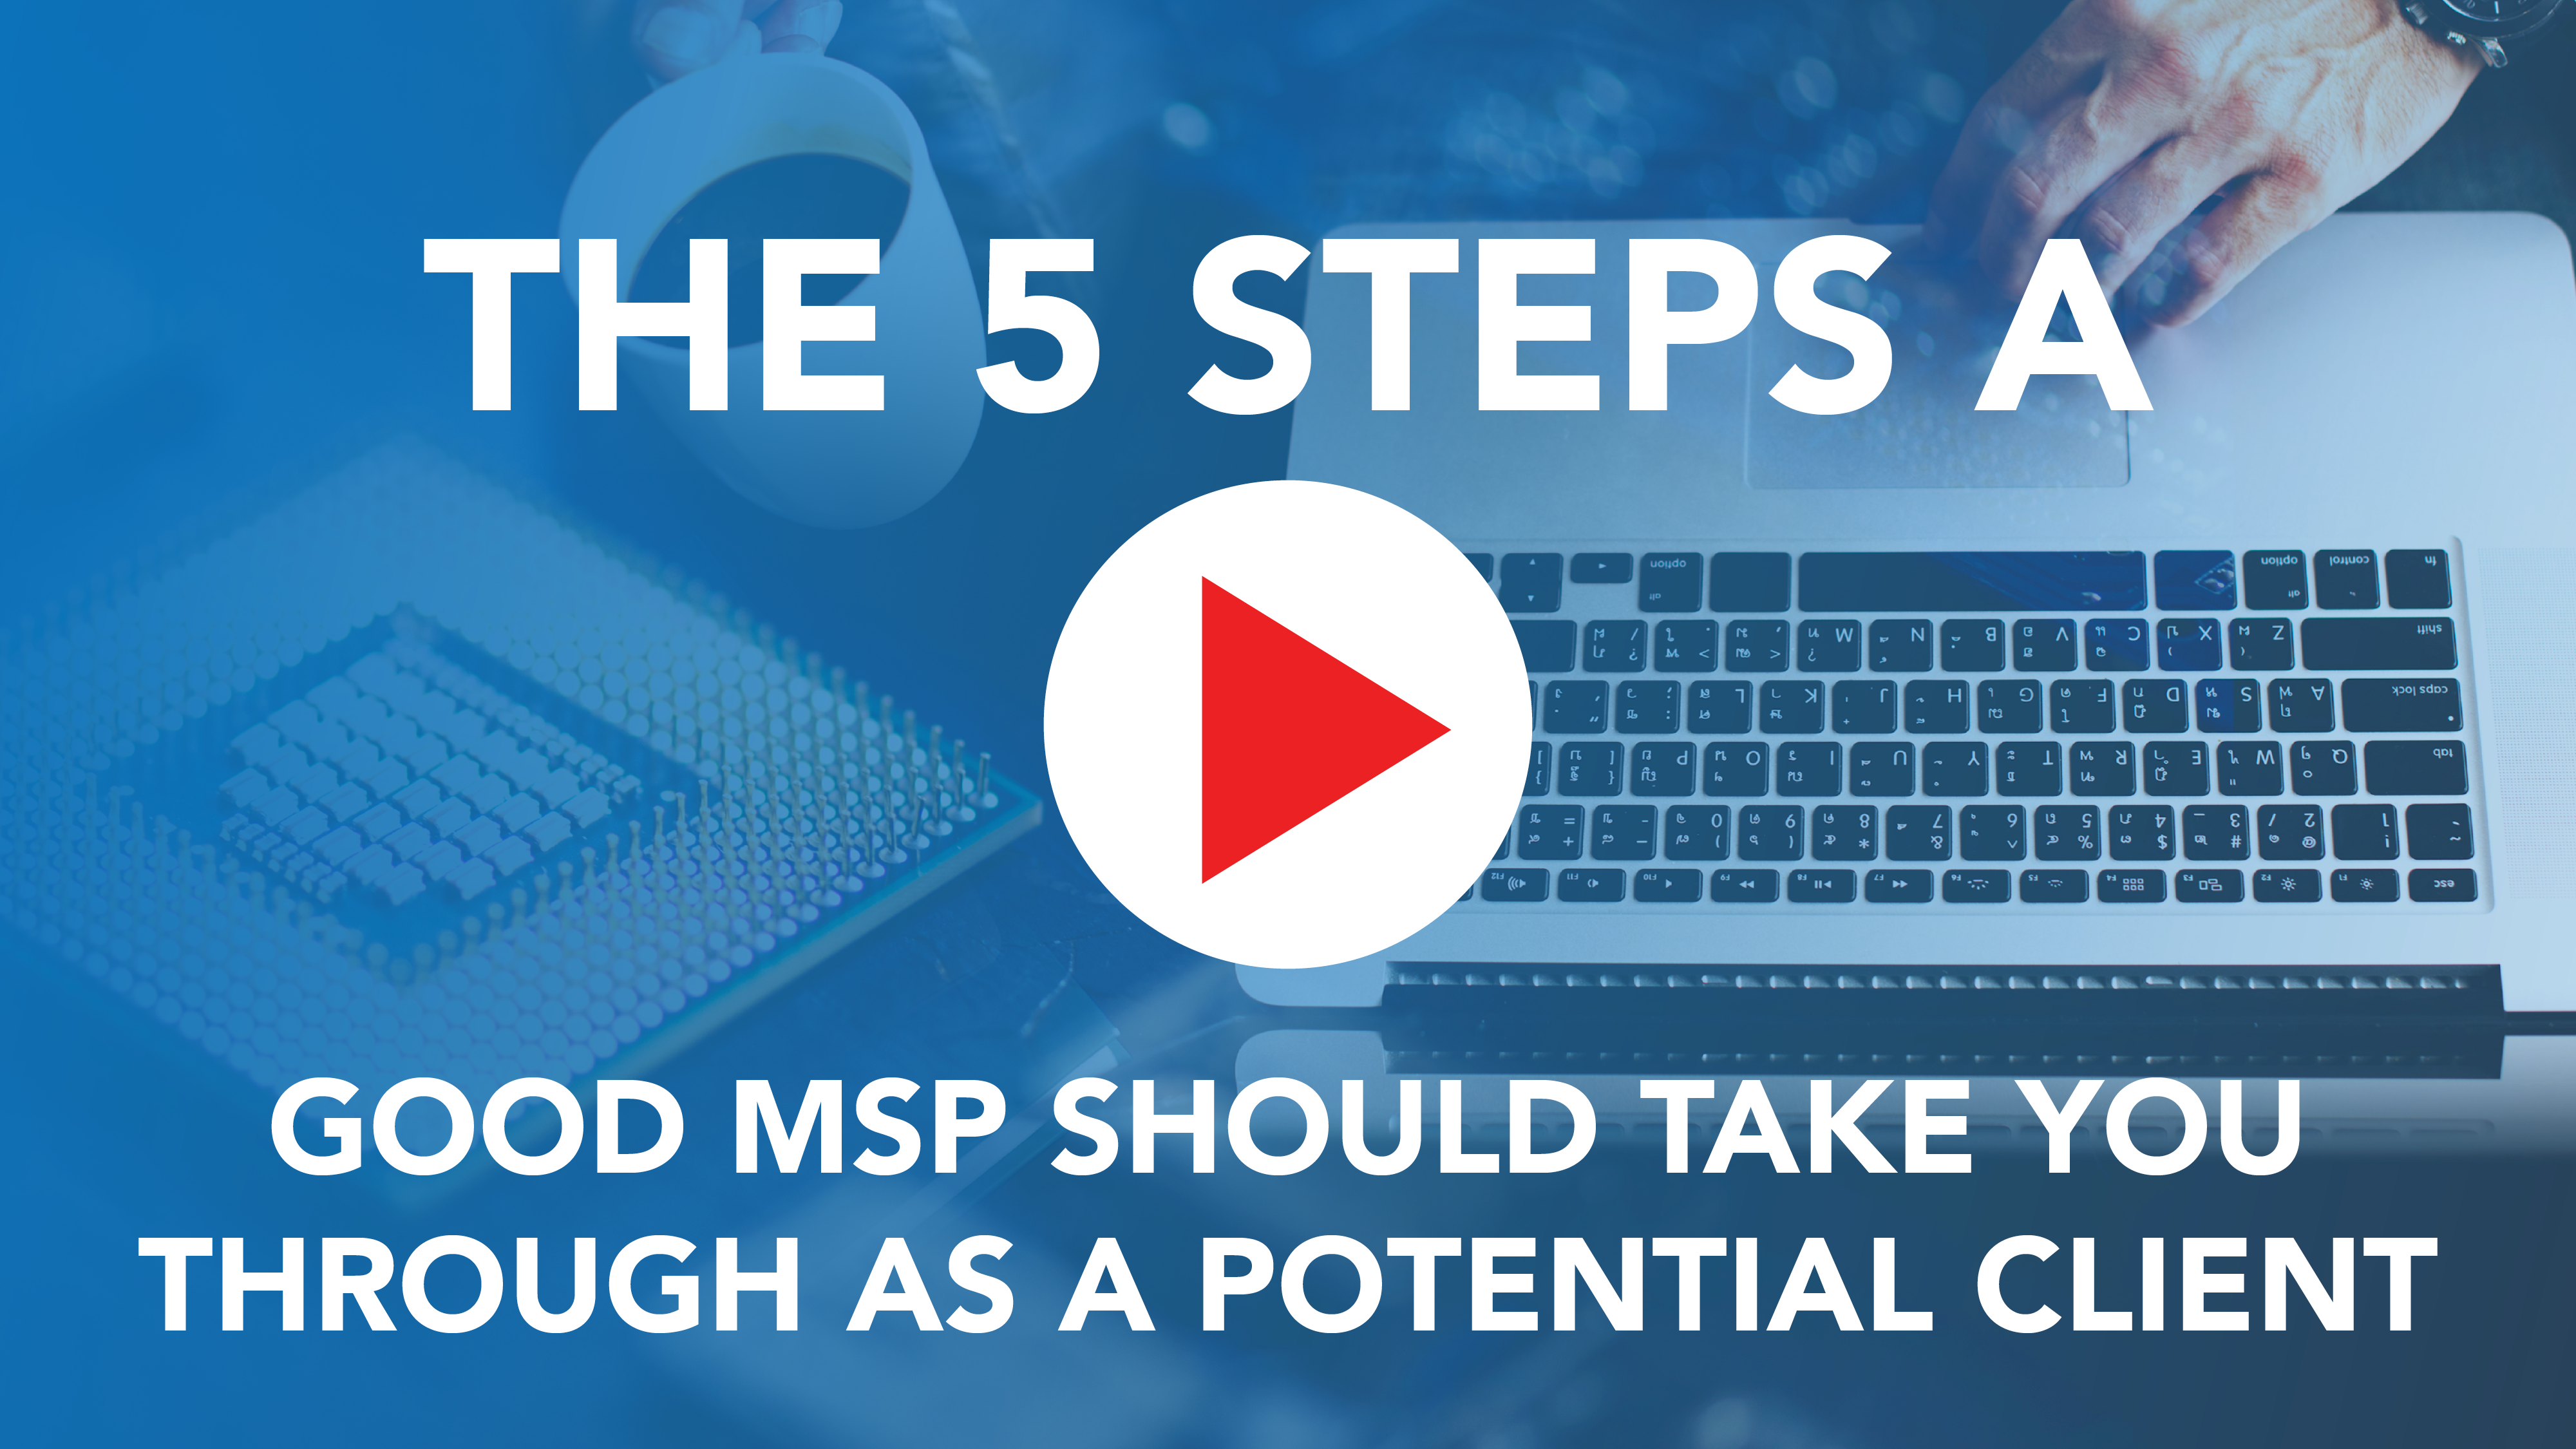 The 5 Steps a Good MSP Should Take You Through as a Potential Client